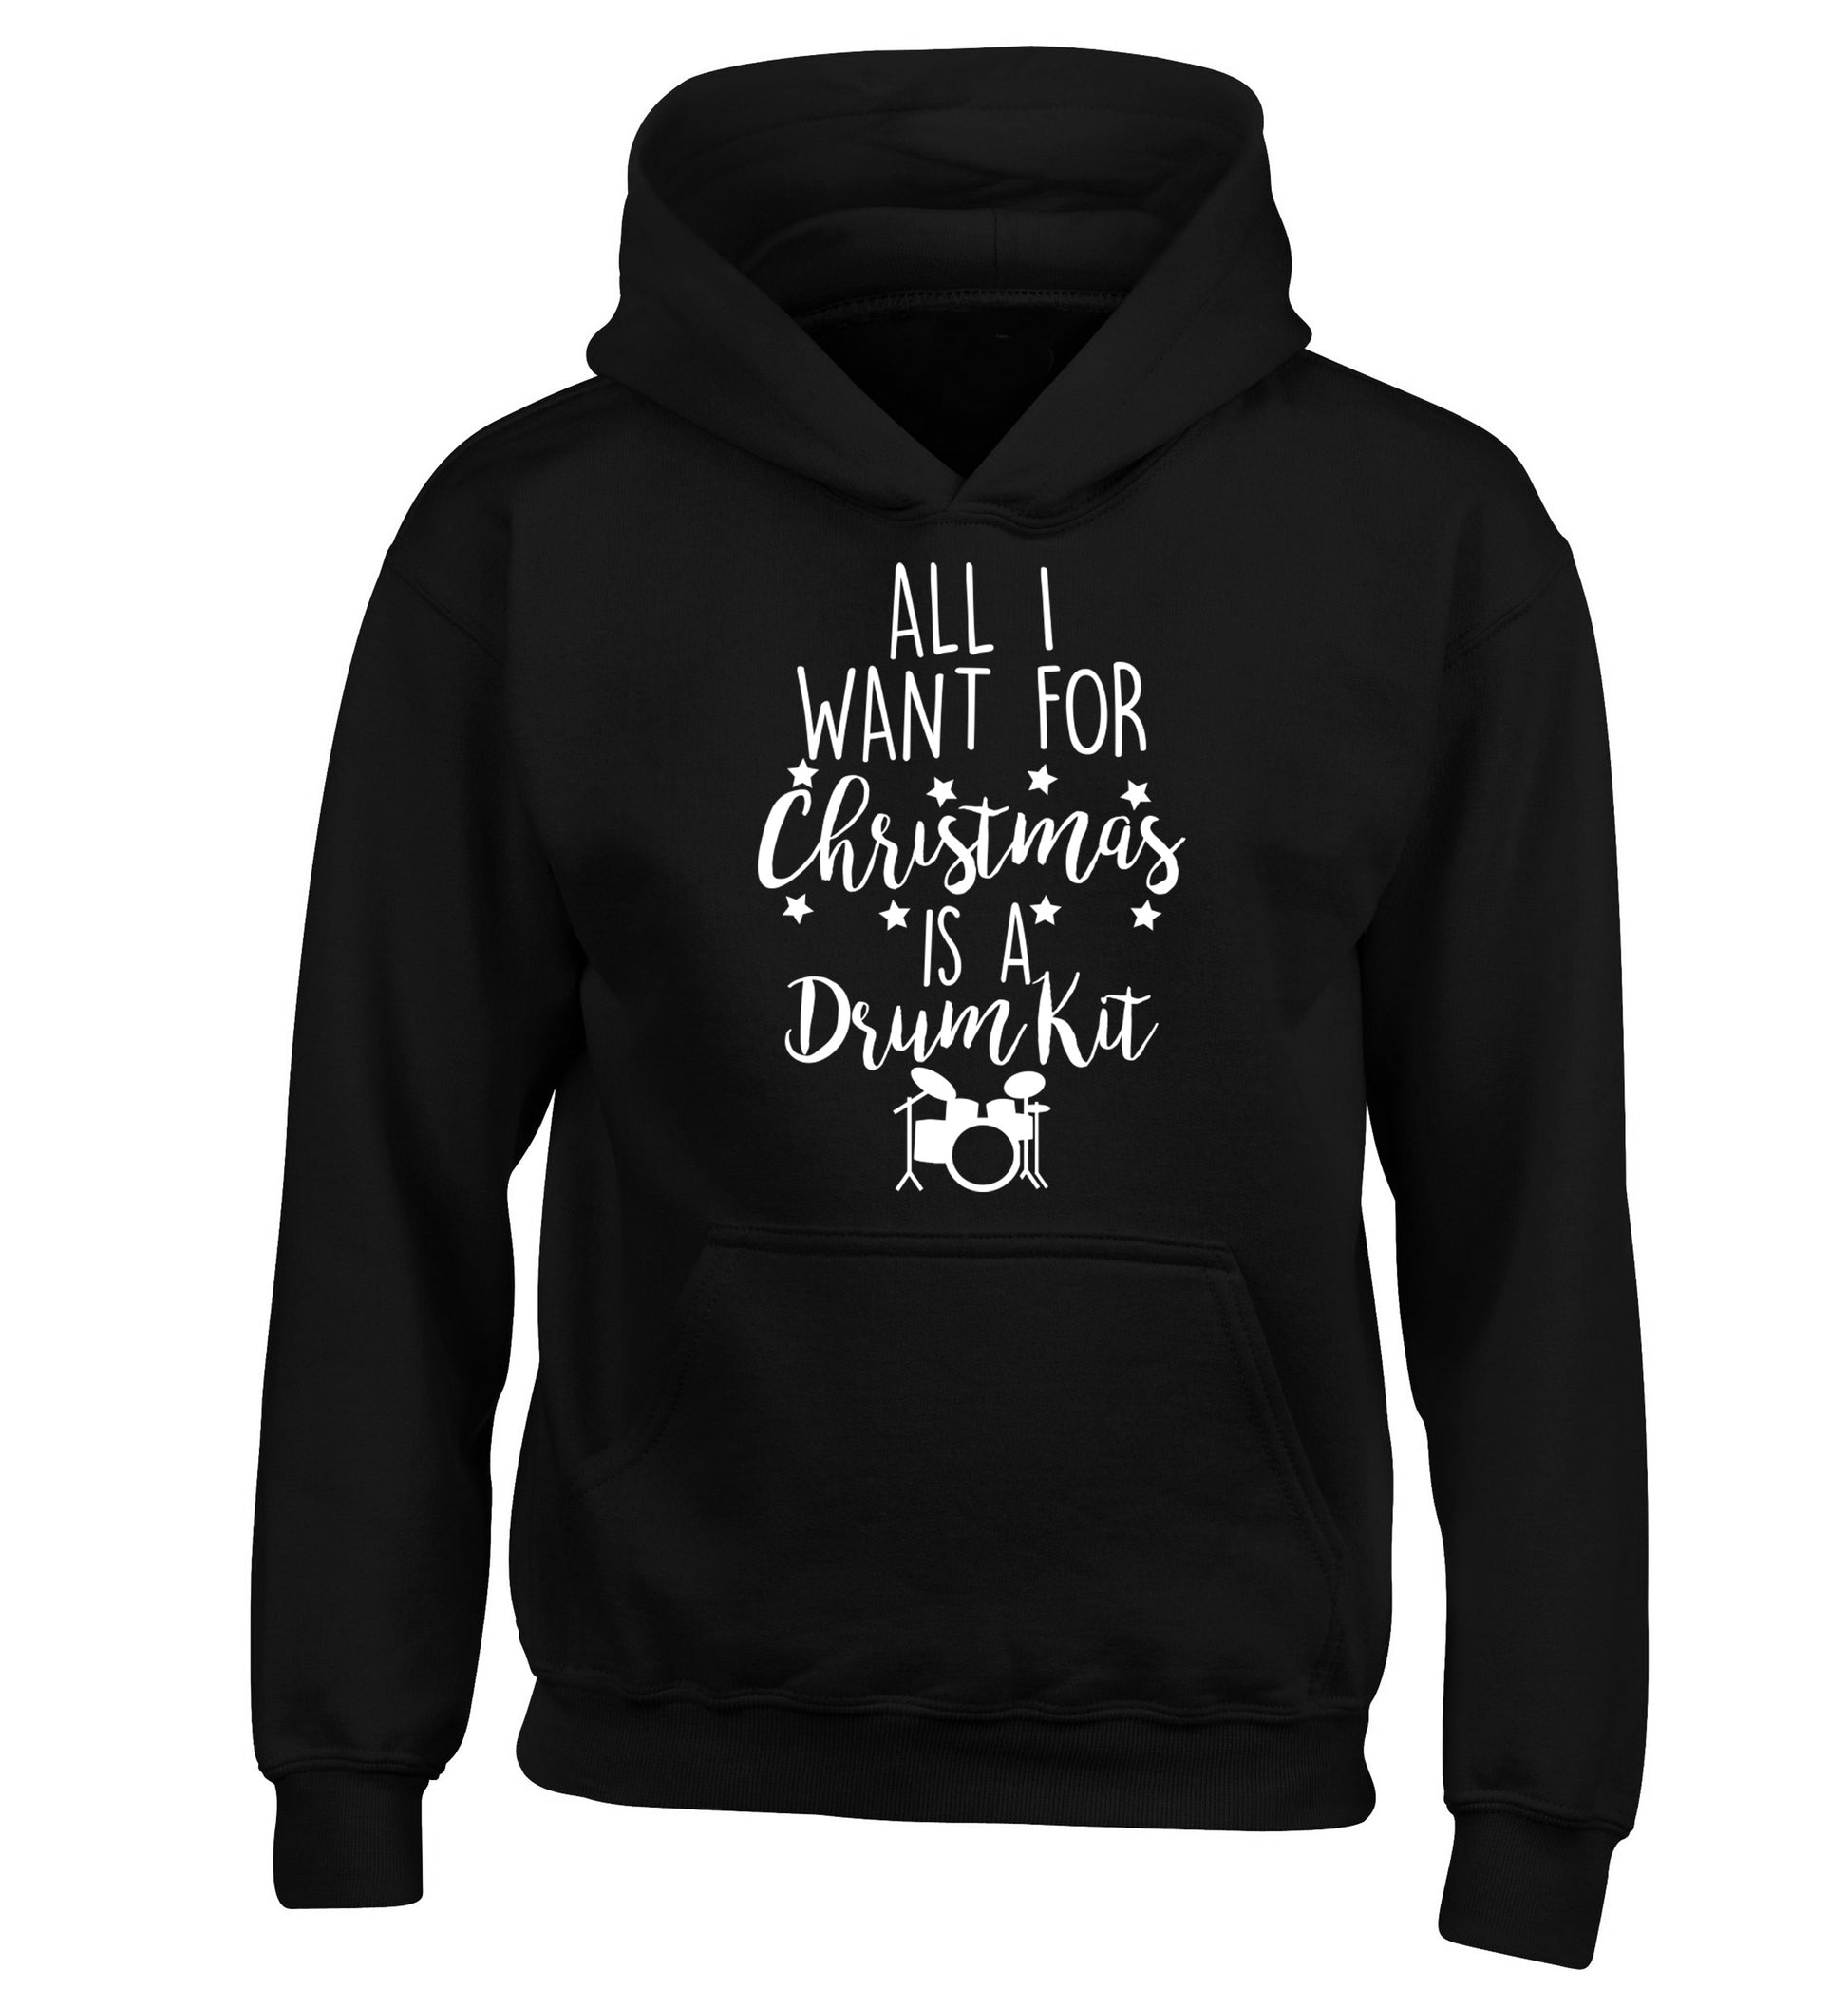 All I want for Christmas is a drum kit! children's black hoodie 12-14 Years